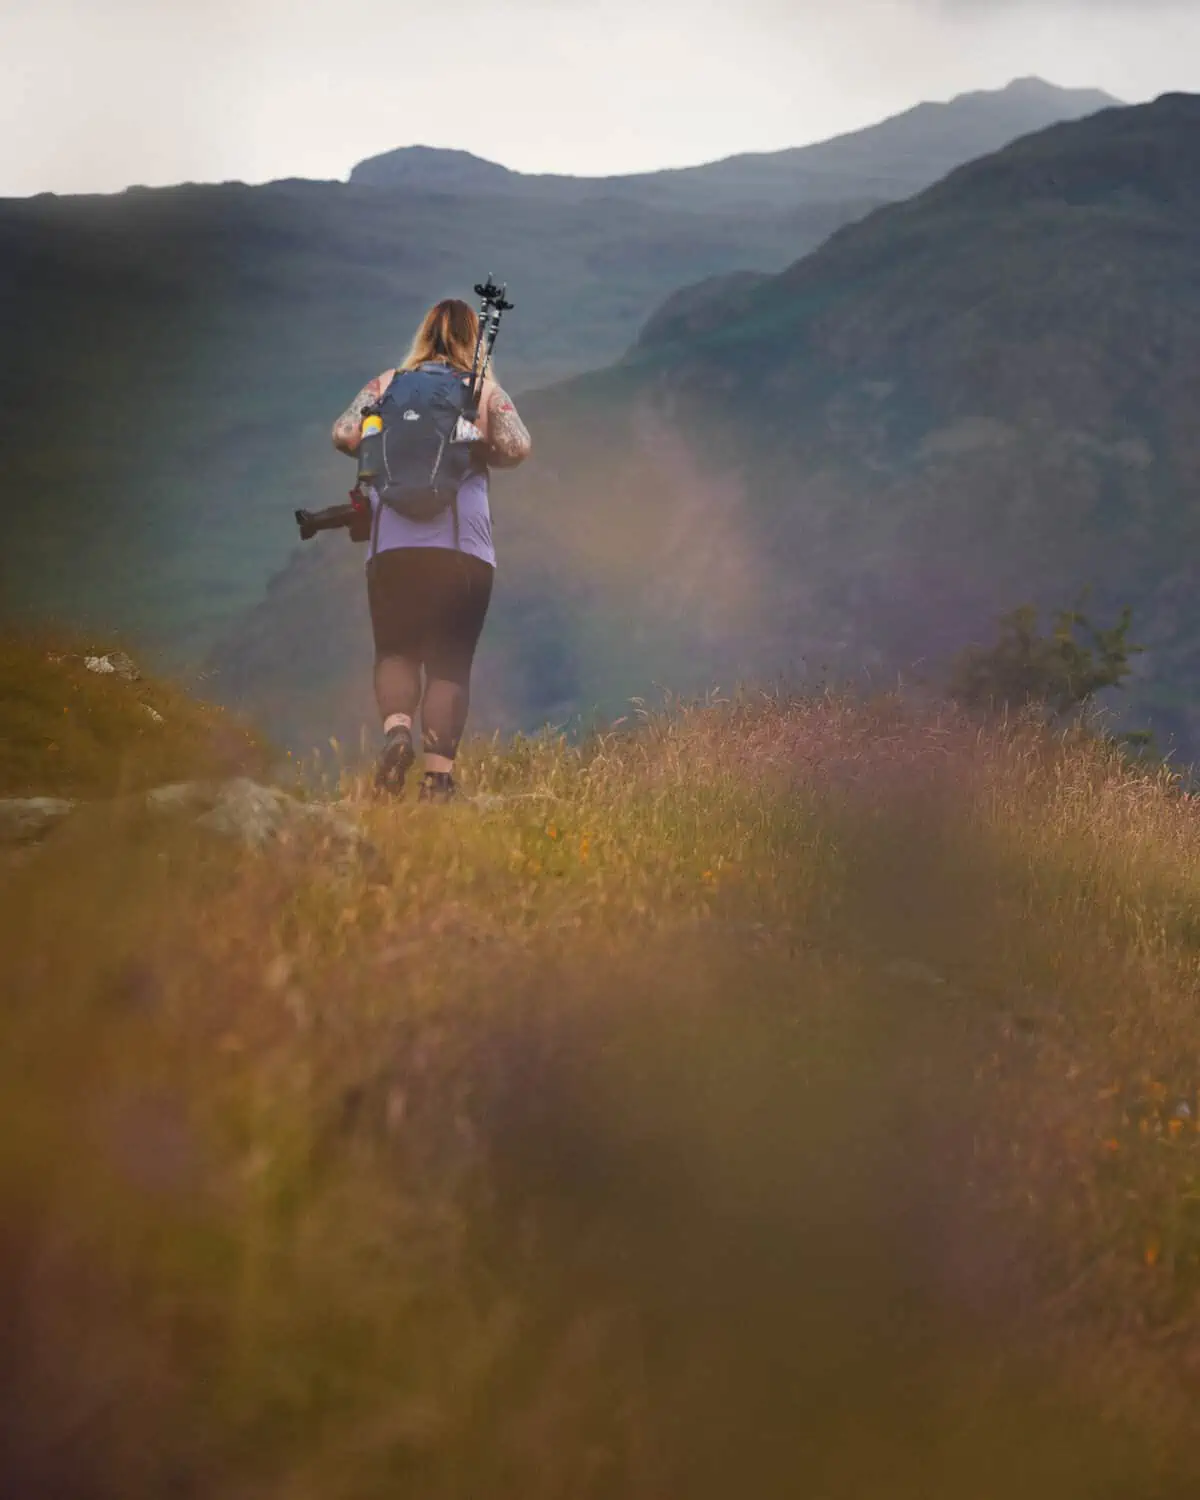 ID: A portrait image. Out of focus foliage takes over the bottom portion of the frame and is made up of orange and yellow hues. In the middle of the frame, Fay is walking away from the camera into a mountain view. Fay is wearing black leggings, purple top, blue backpack and has hiking poles in the side of the pack.